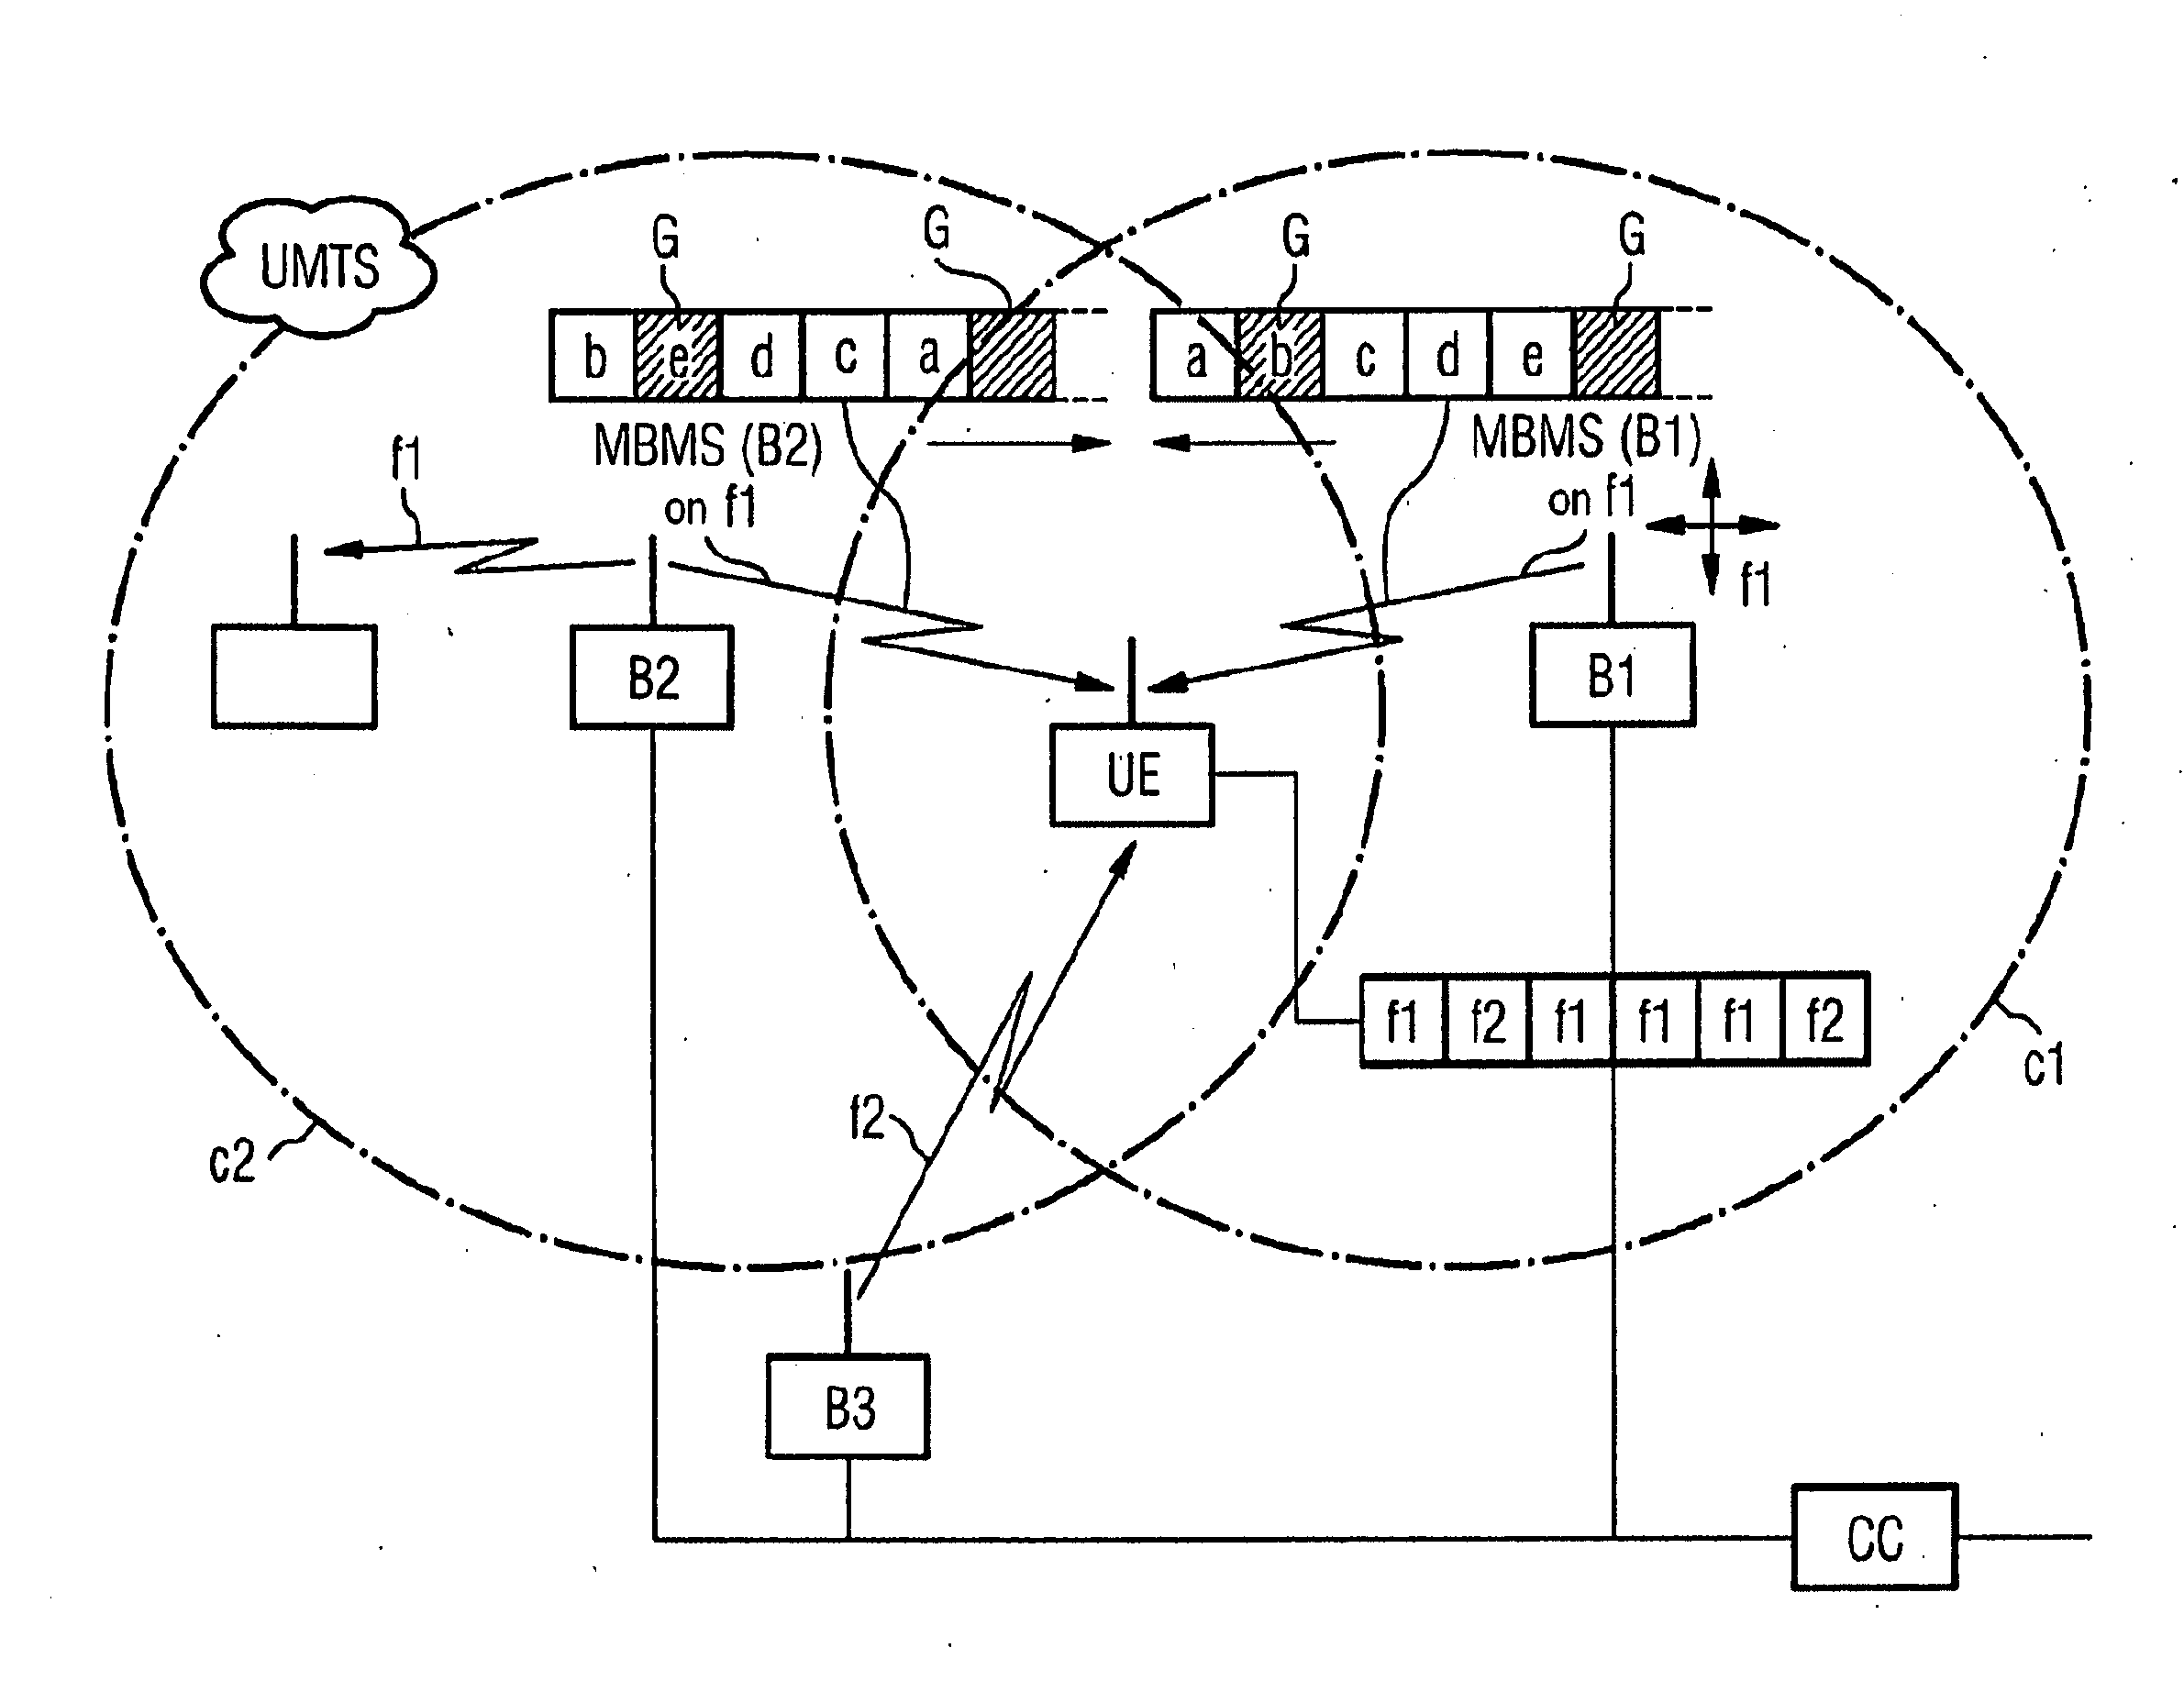 Method for Receiving Data Sent in a Sequence in a Mobile Radio System with Reception Gaps